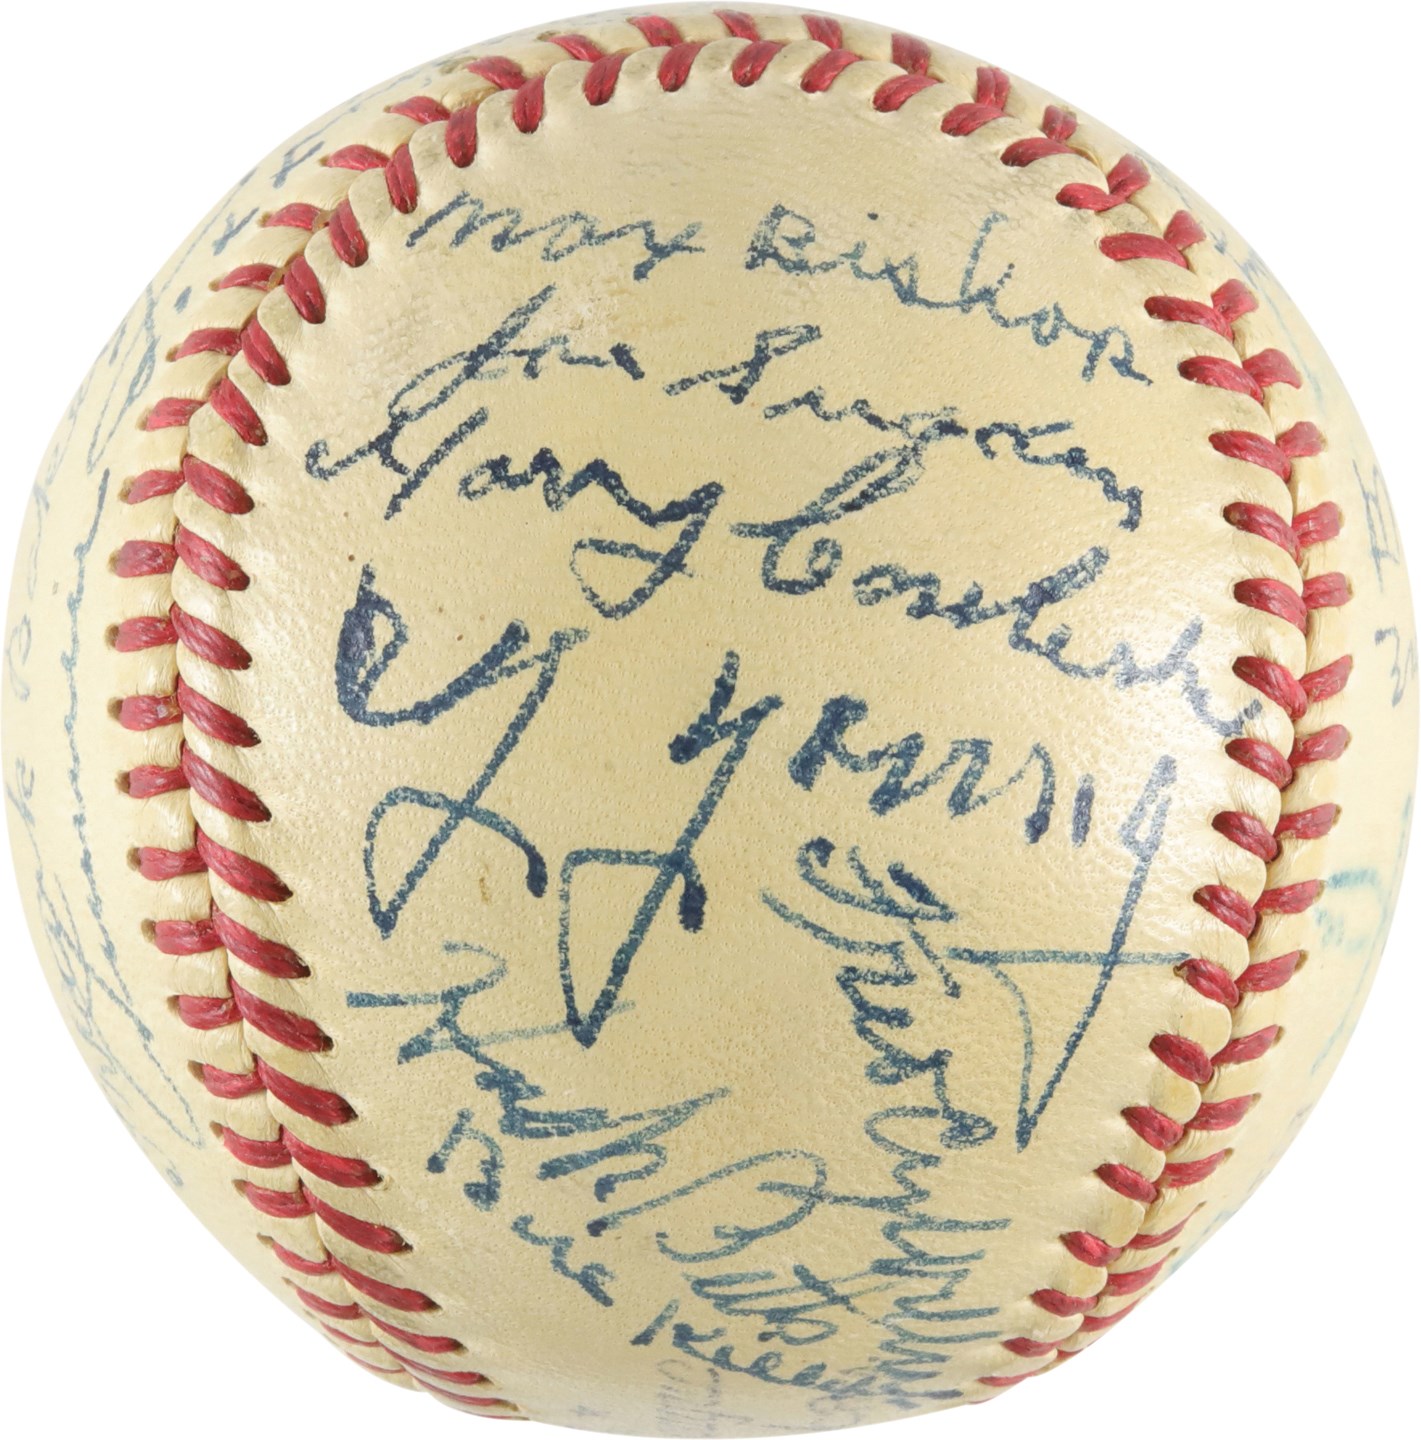 - Circa 1950 Old Timers Signed Baseball w/Cy Young, Frank Baker, Jimmie Foxx & Early 19th Century Players (PSA)